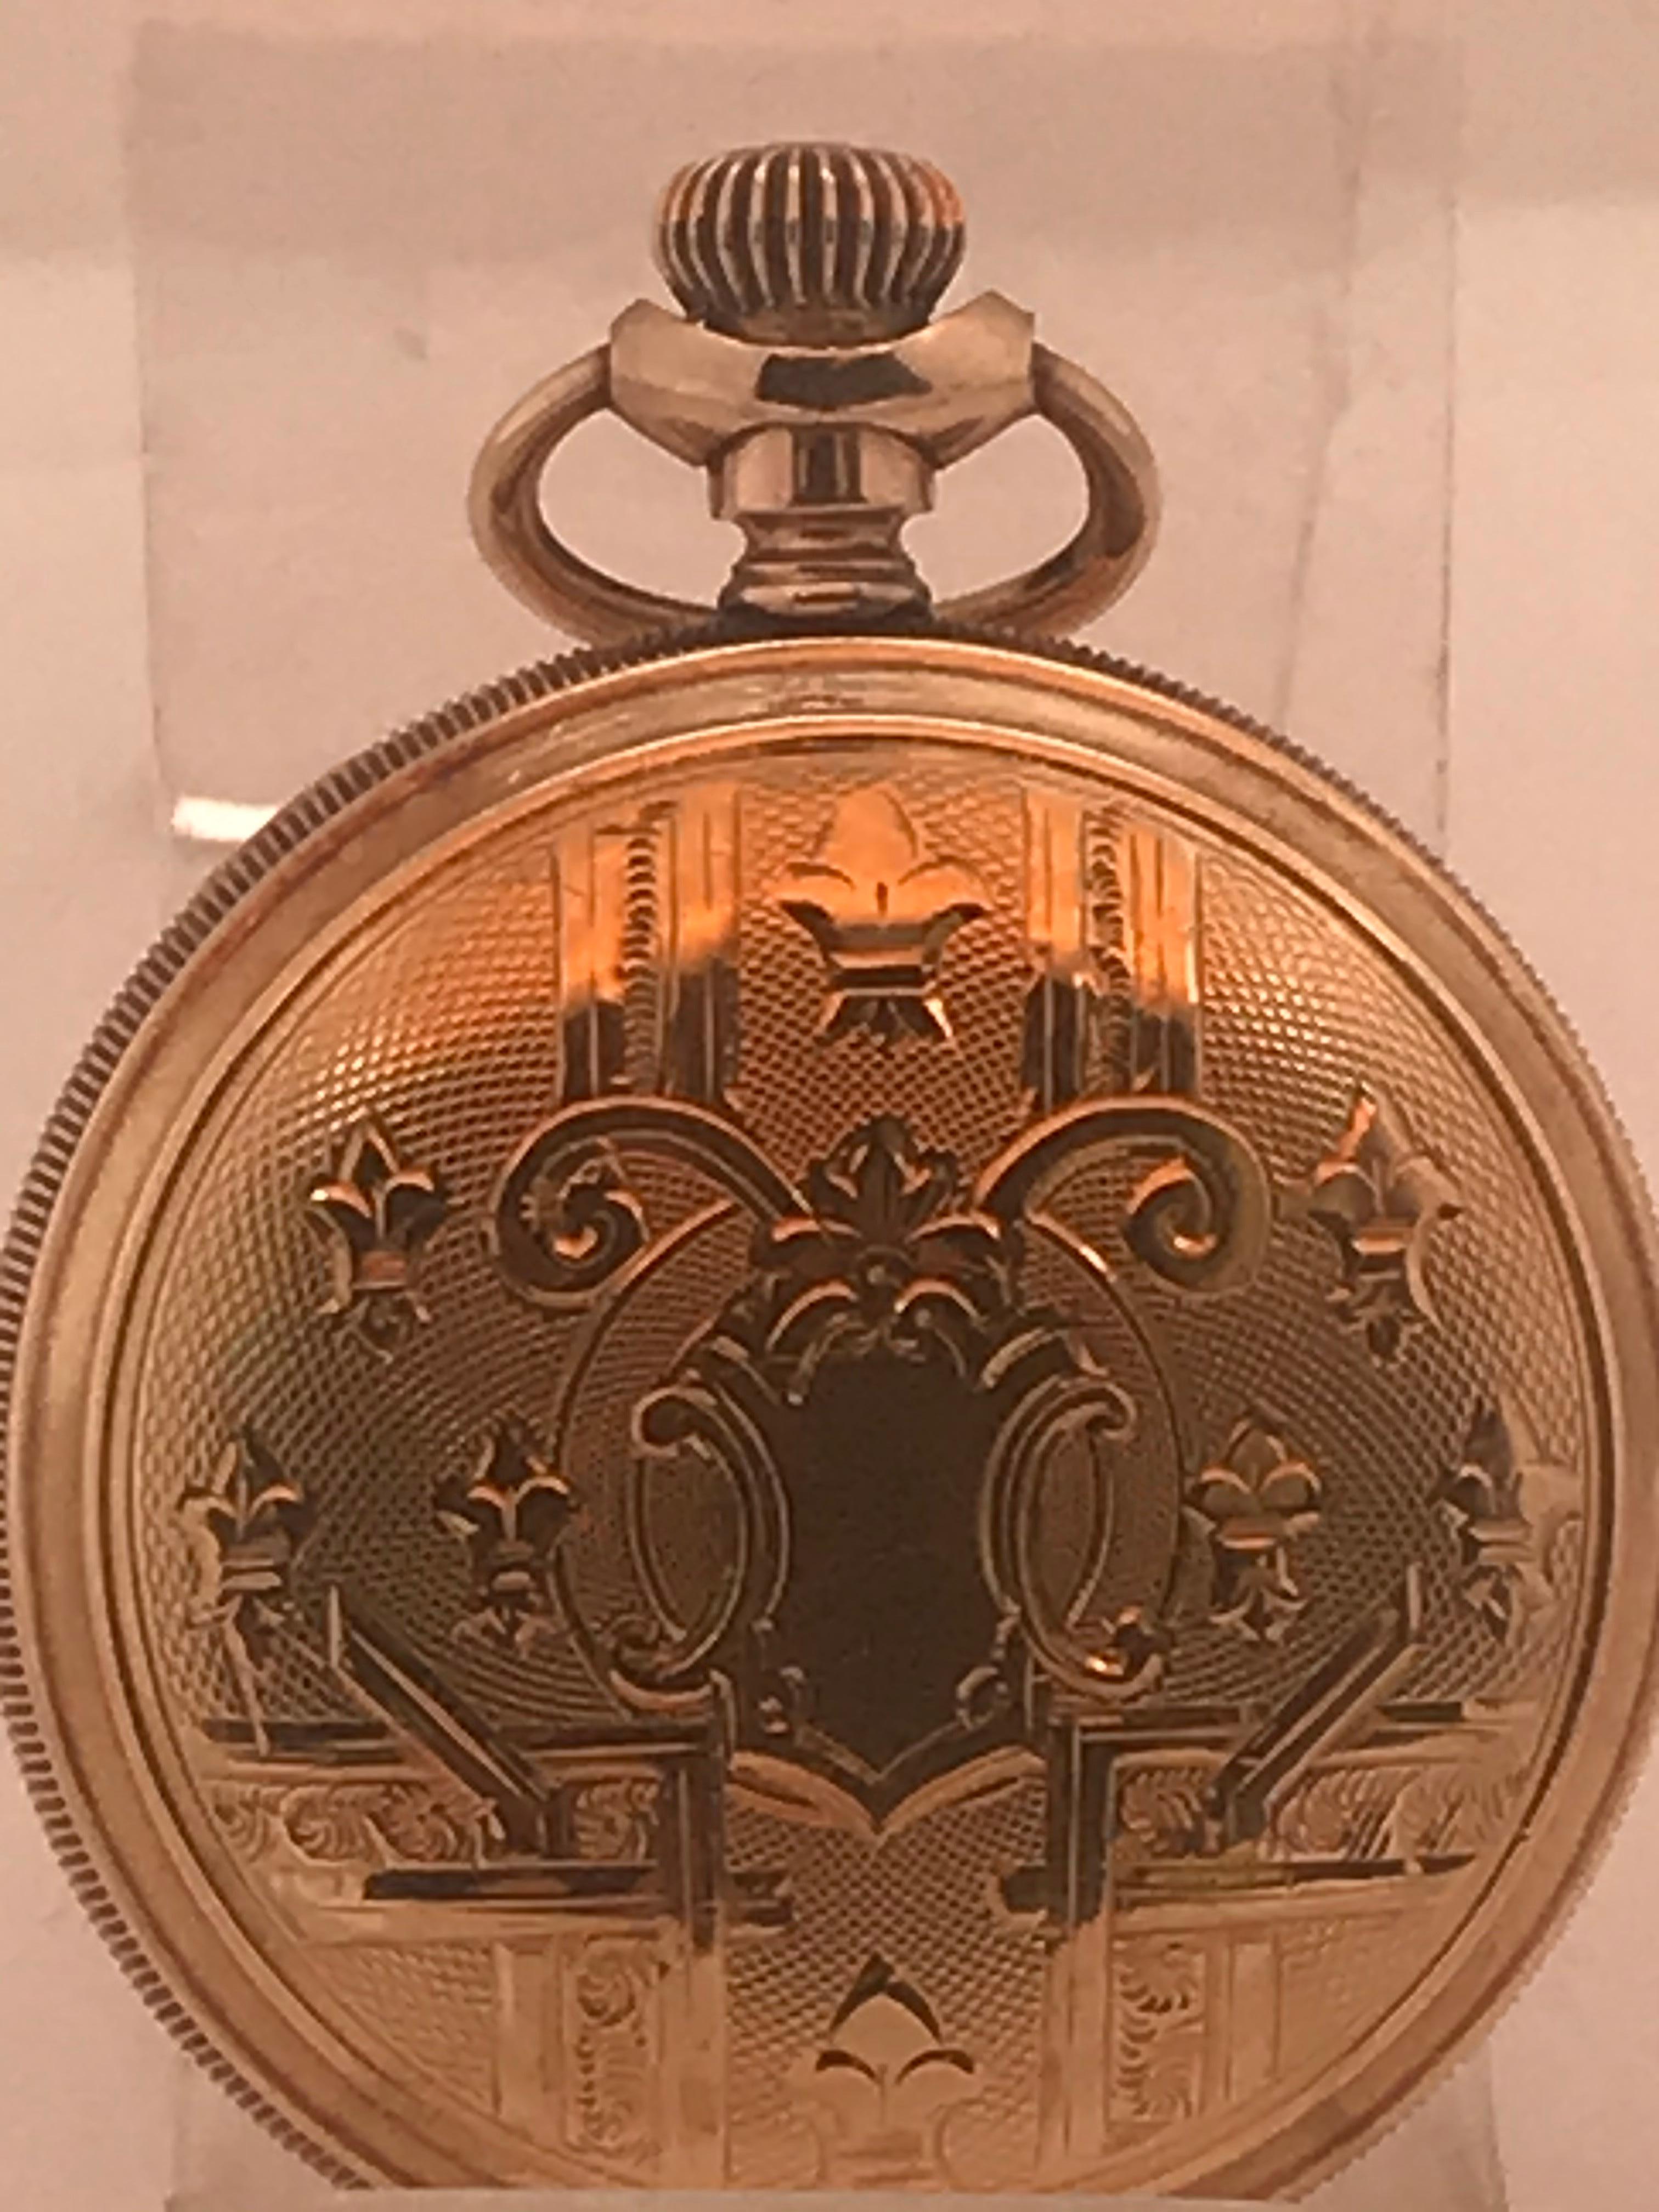 Beautiful Victorian period Elgin pocket watch, circa 1899. This gold filled beauty has a 7 jewel manual wind movement. The hunting case design with dust cover is 36mms diameter with beautiful engraving.  Serial #8915162, case #5491207.
